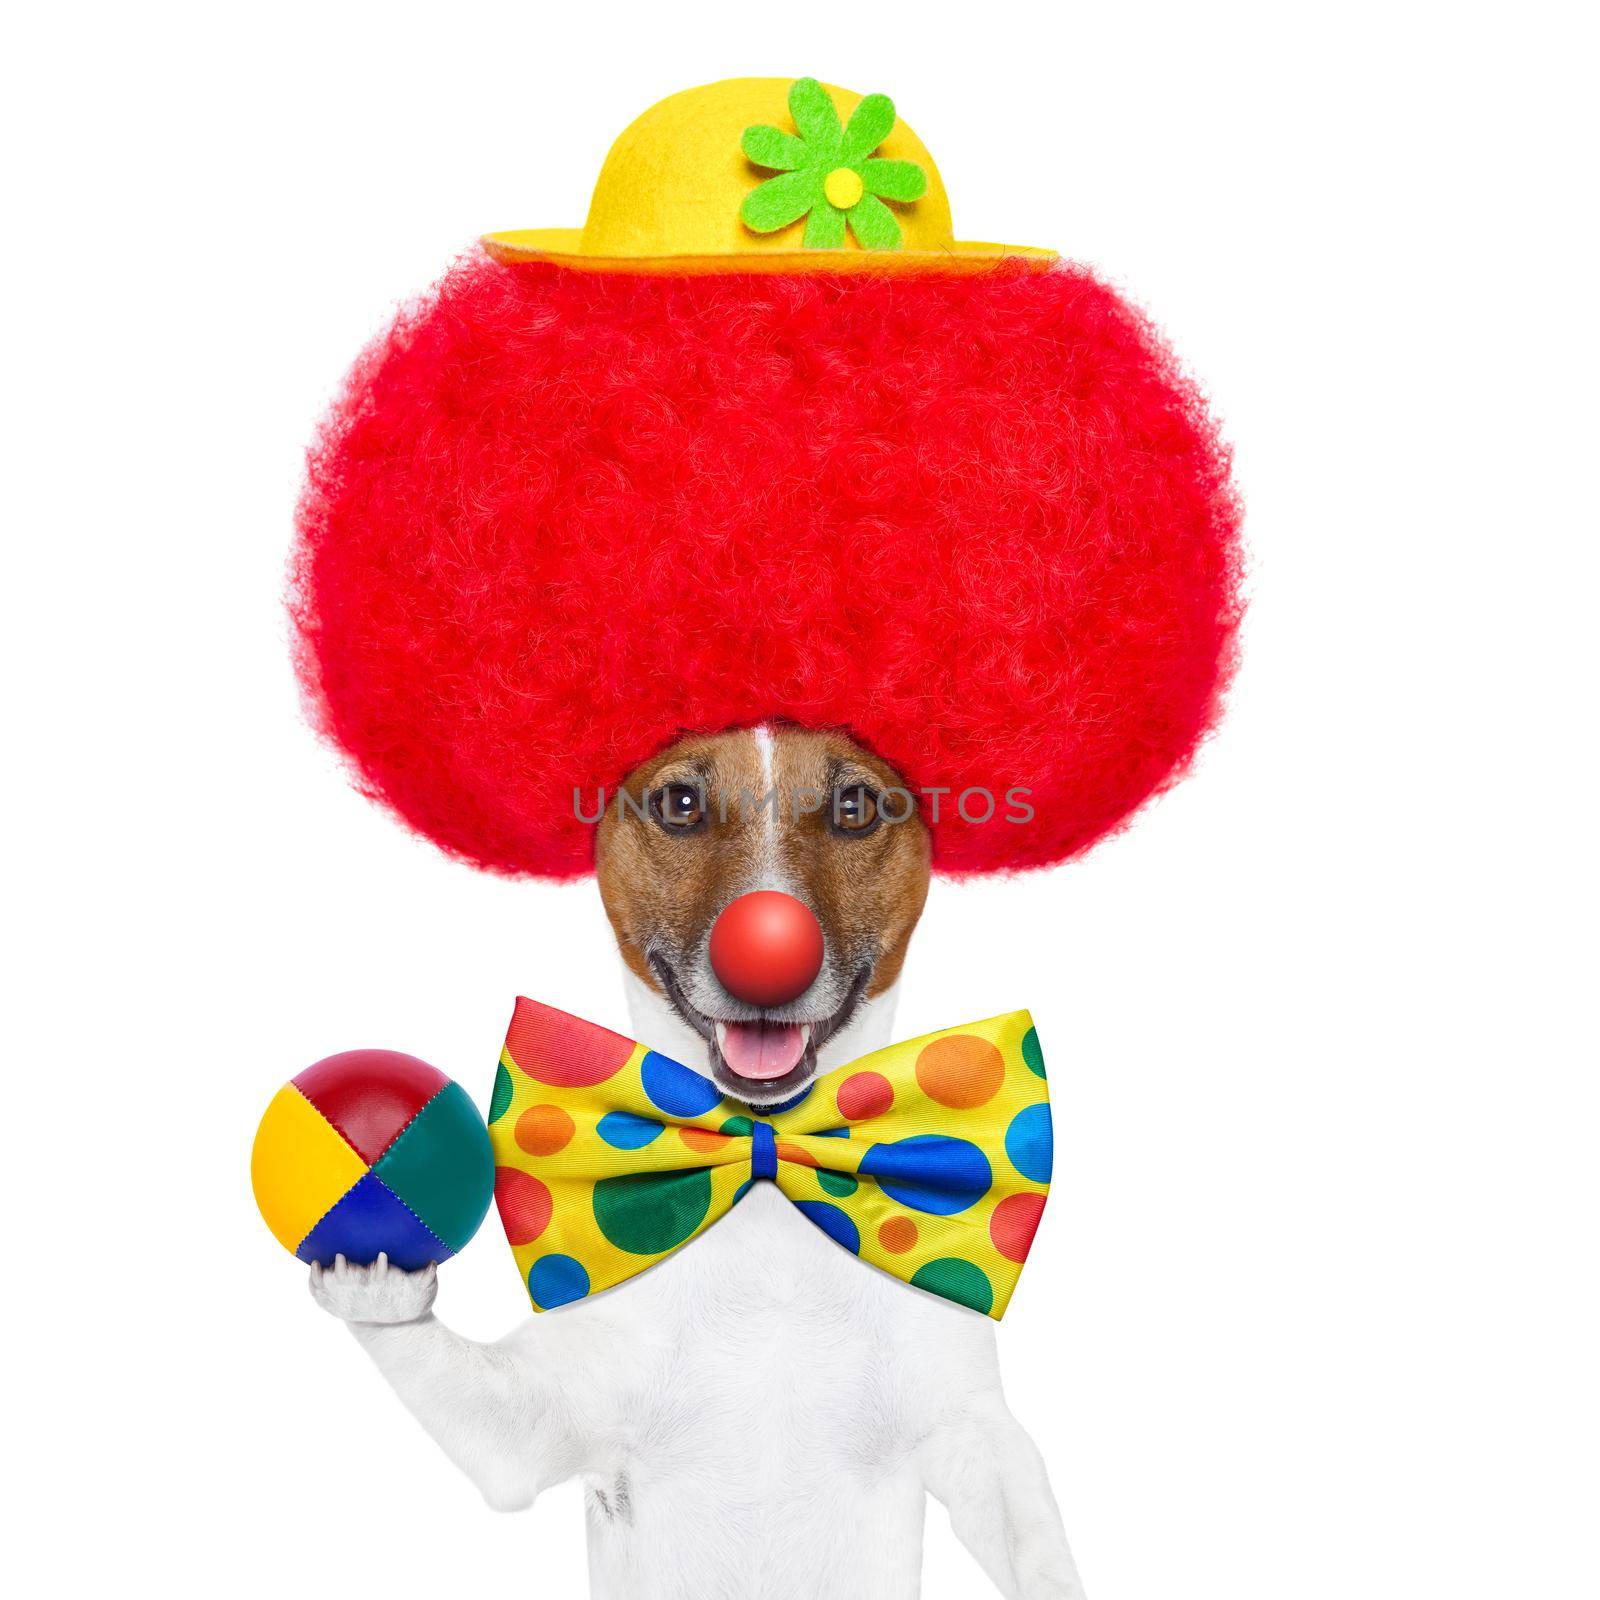 clown dog with red wig and nose holding a ball